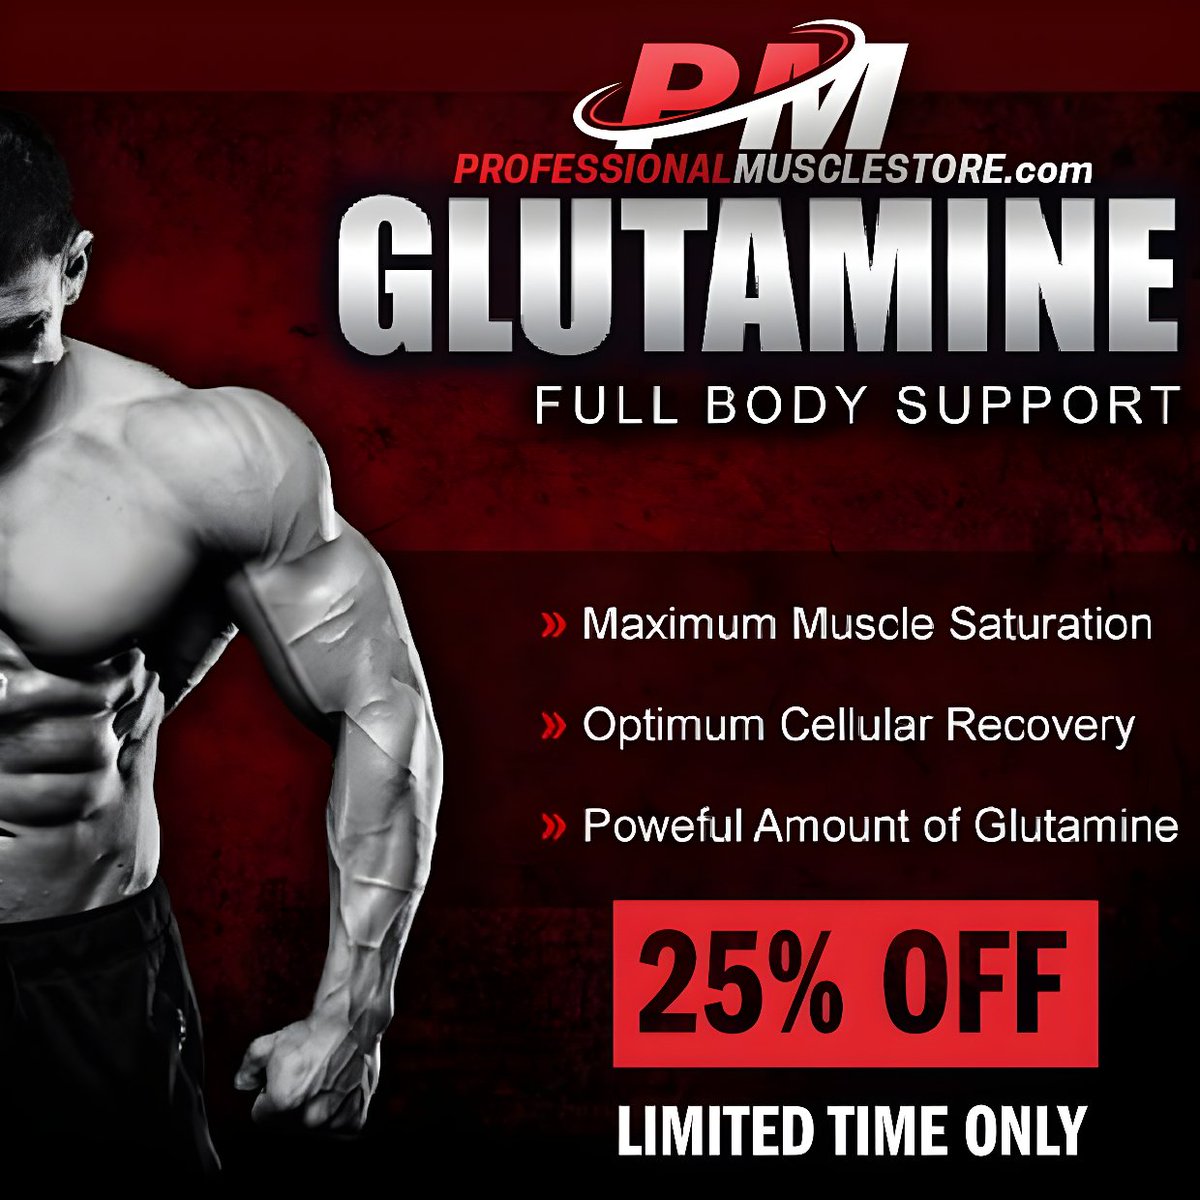 25% OFF our Purus Labs Glutamine! Use code PURUS at checkout!
professionalmusclestore.com/.../purus-labs...
#supplements #ripped #muscle #bodybuilding #pump #training #strong #gymlife #gym #workout #fitness #squat #gains #shredded #ifbb #instafit #sale
ProfessionalMuscleStore.com